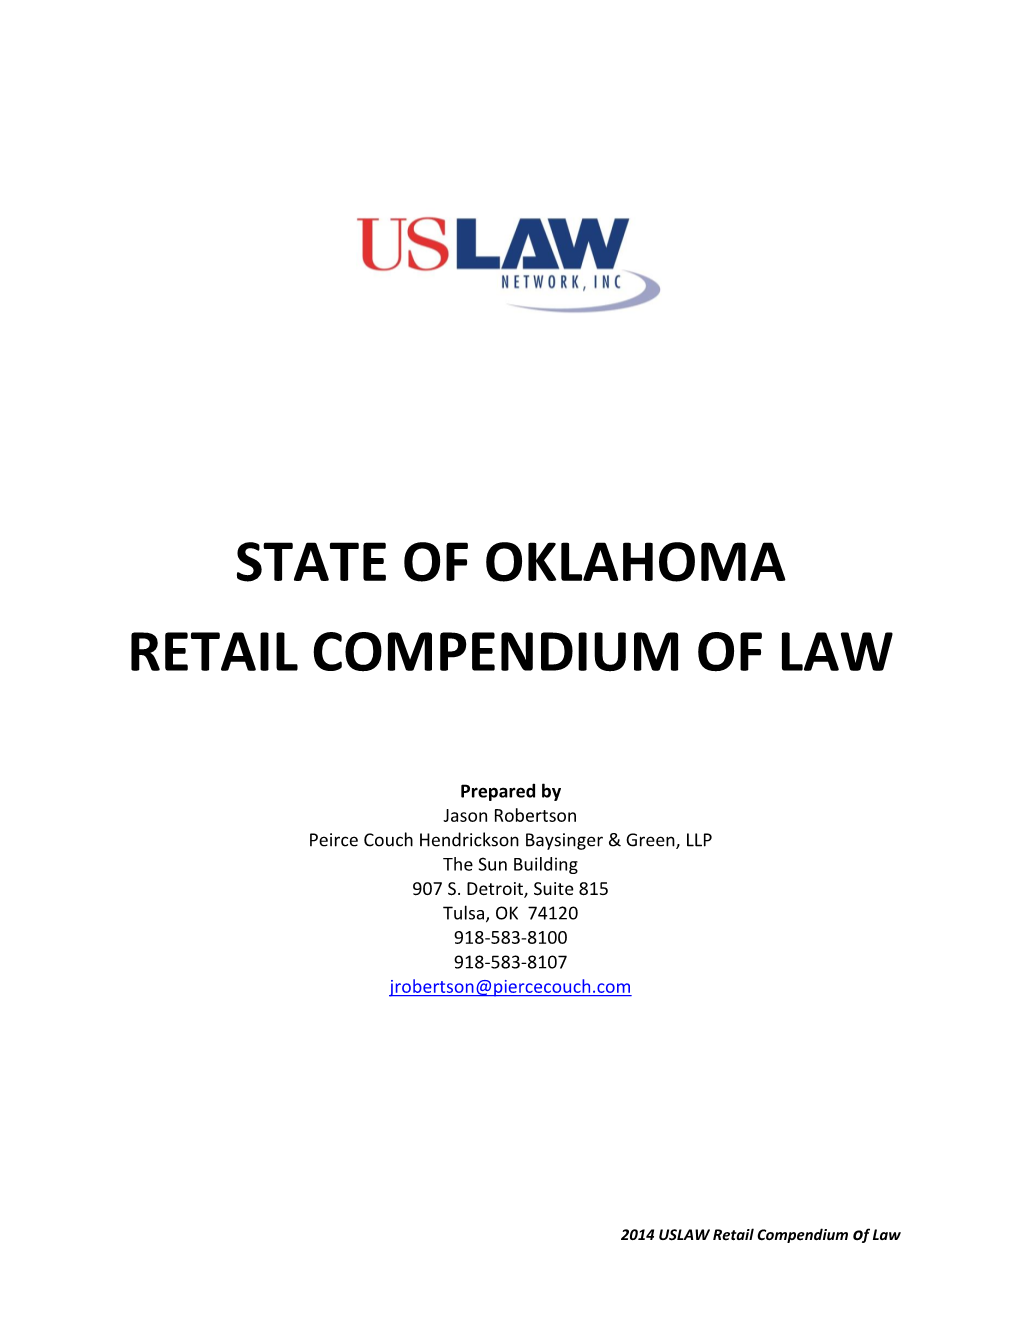 State of Oklahoma Retail Compendium of Law